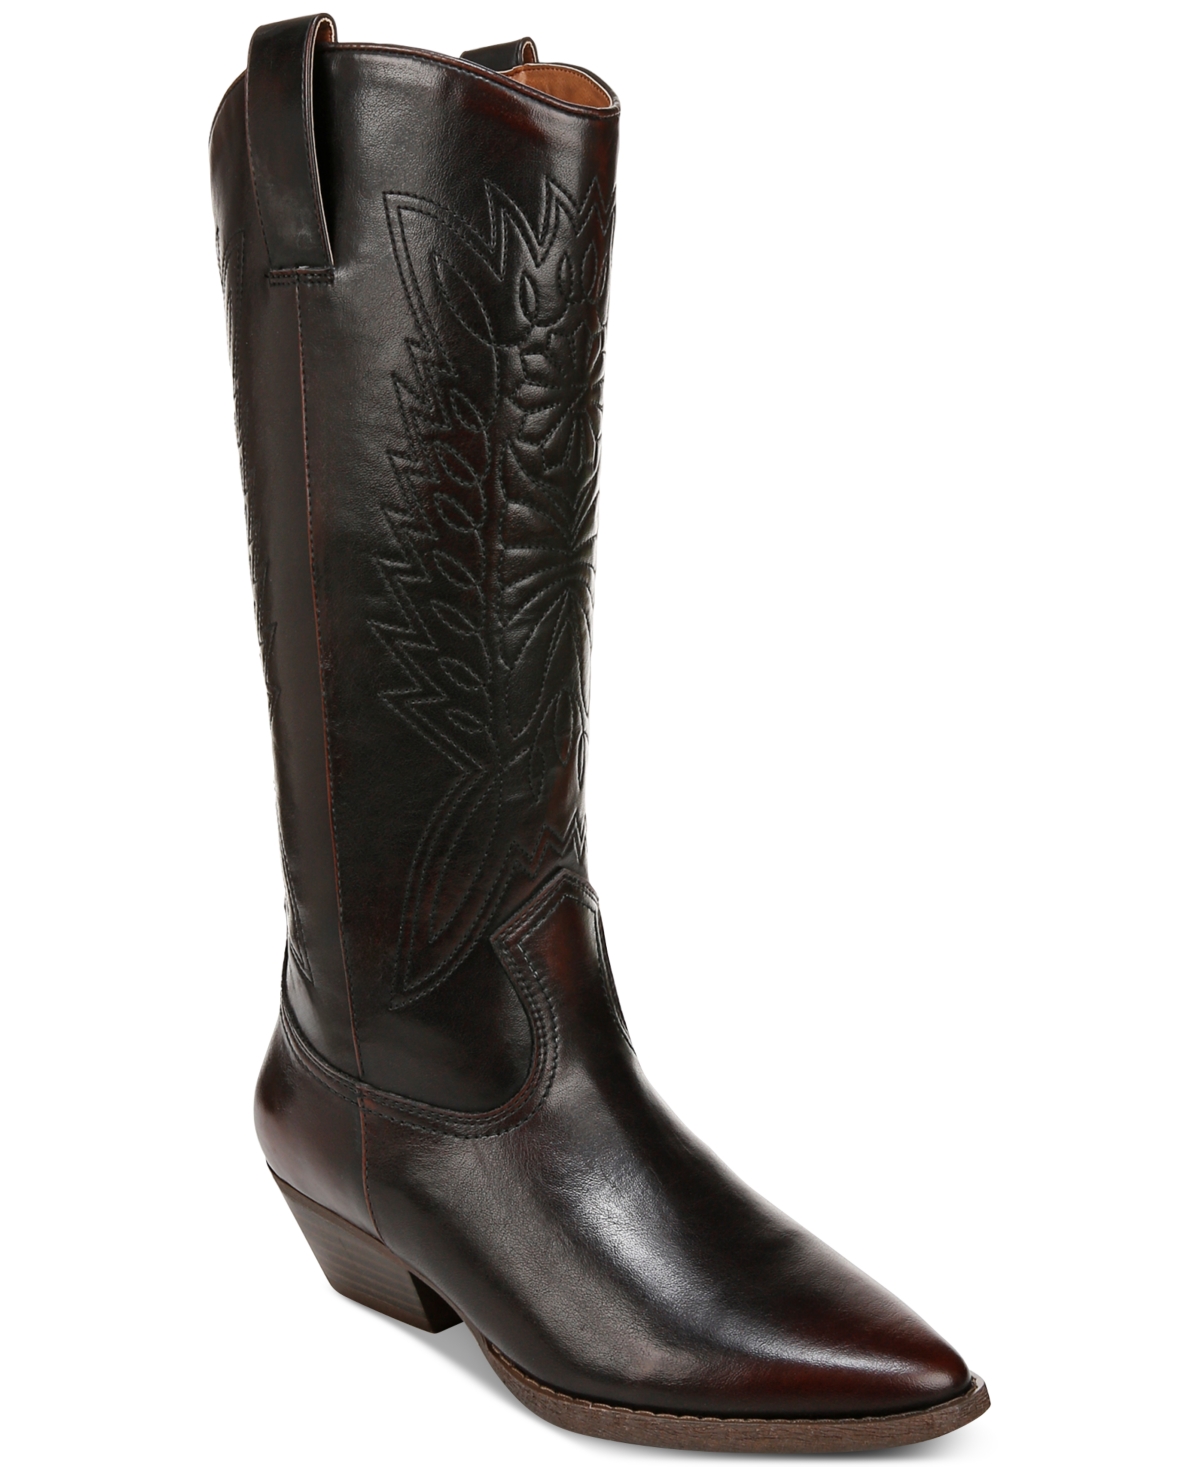 Women's Morghan Tall Western Boots - Mahogany/Black Leather